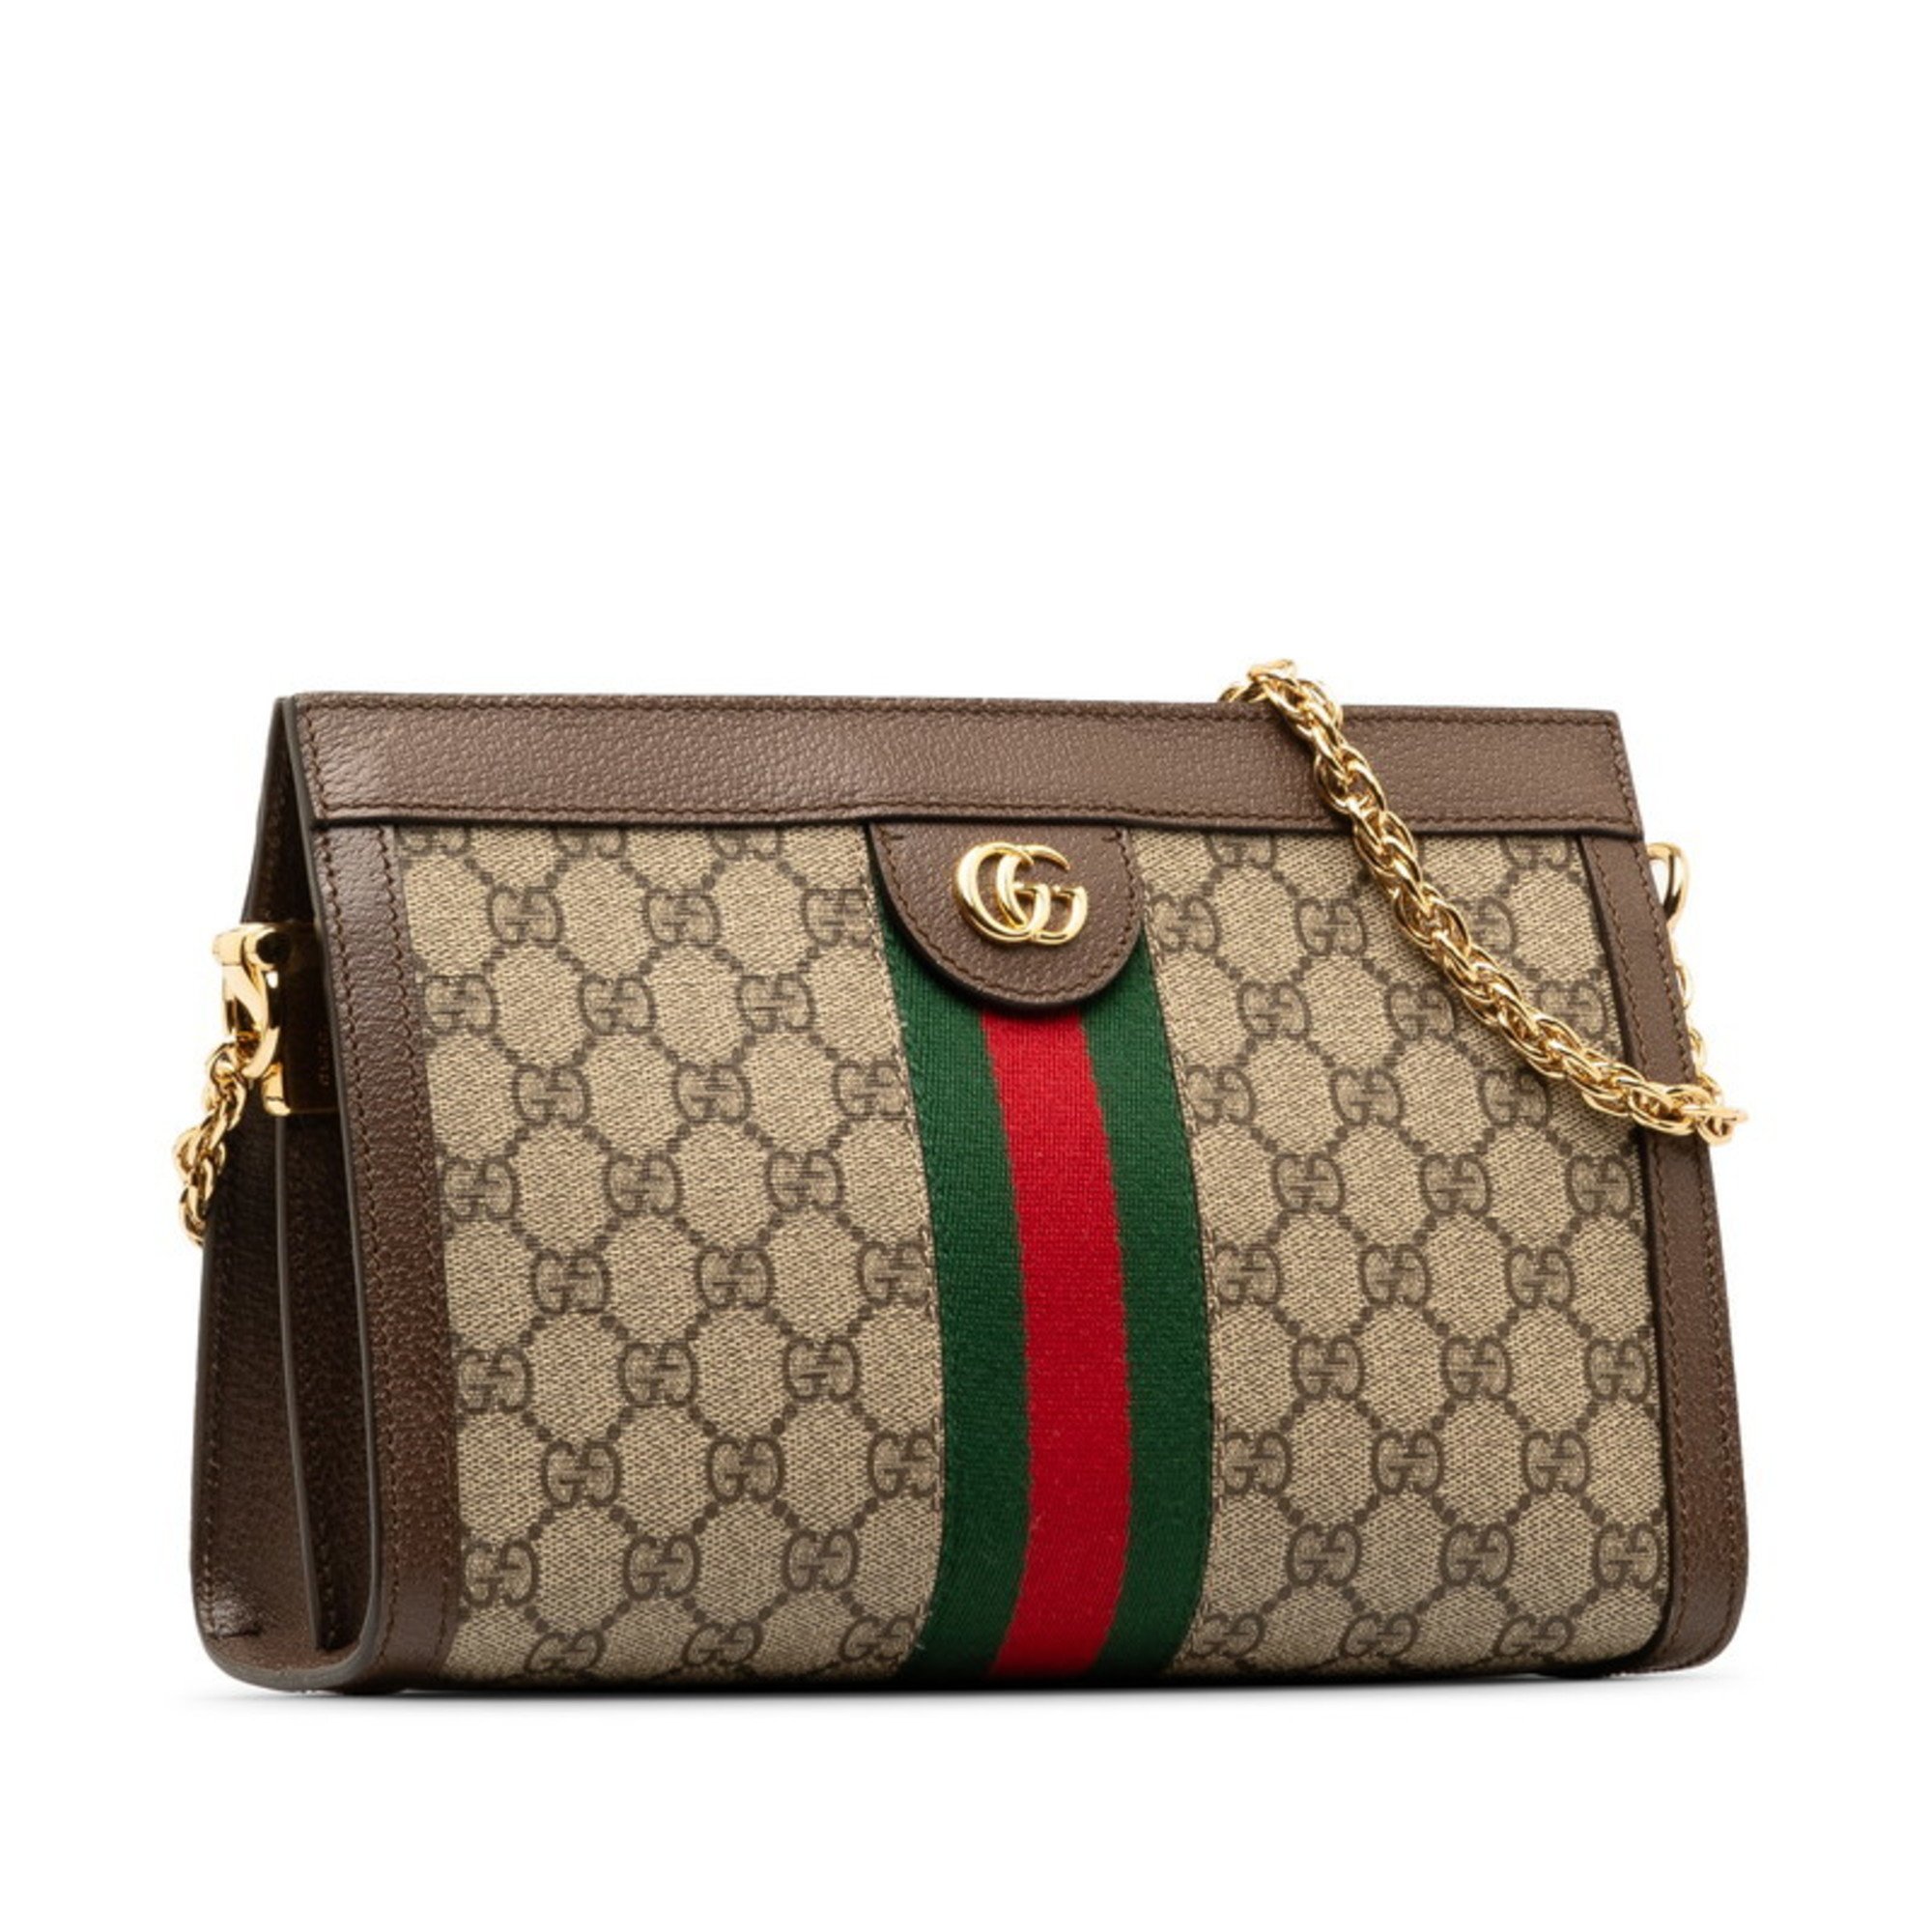 Gucci GG Supreme Ophidia Small Sherry Line Chain Shoulder Bag 503877 Beige Brown PVC Leather Women's GUCCI